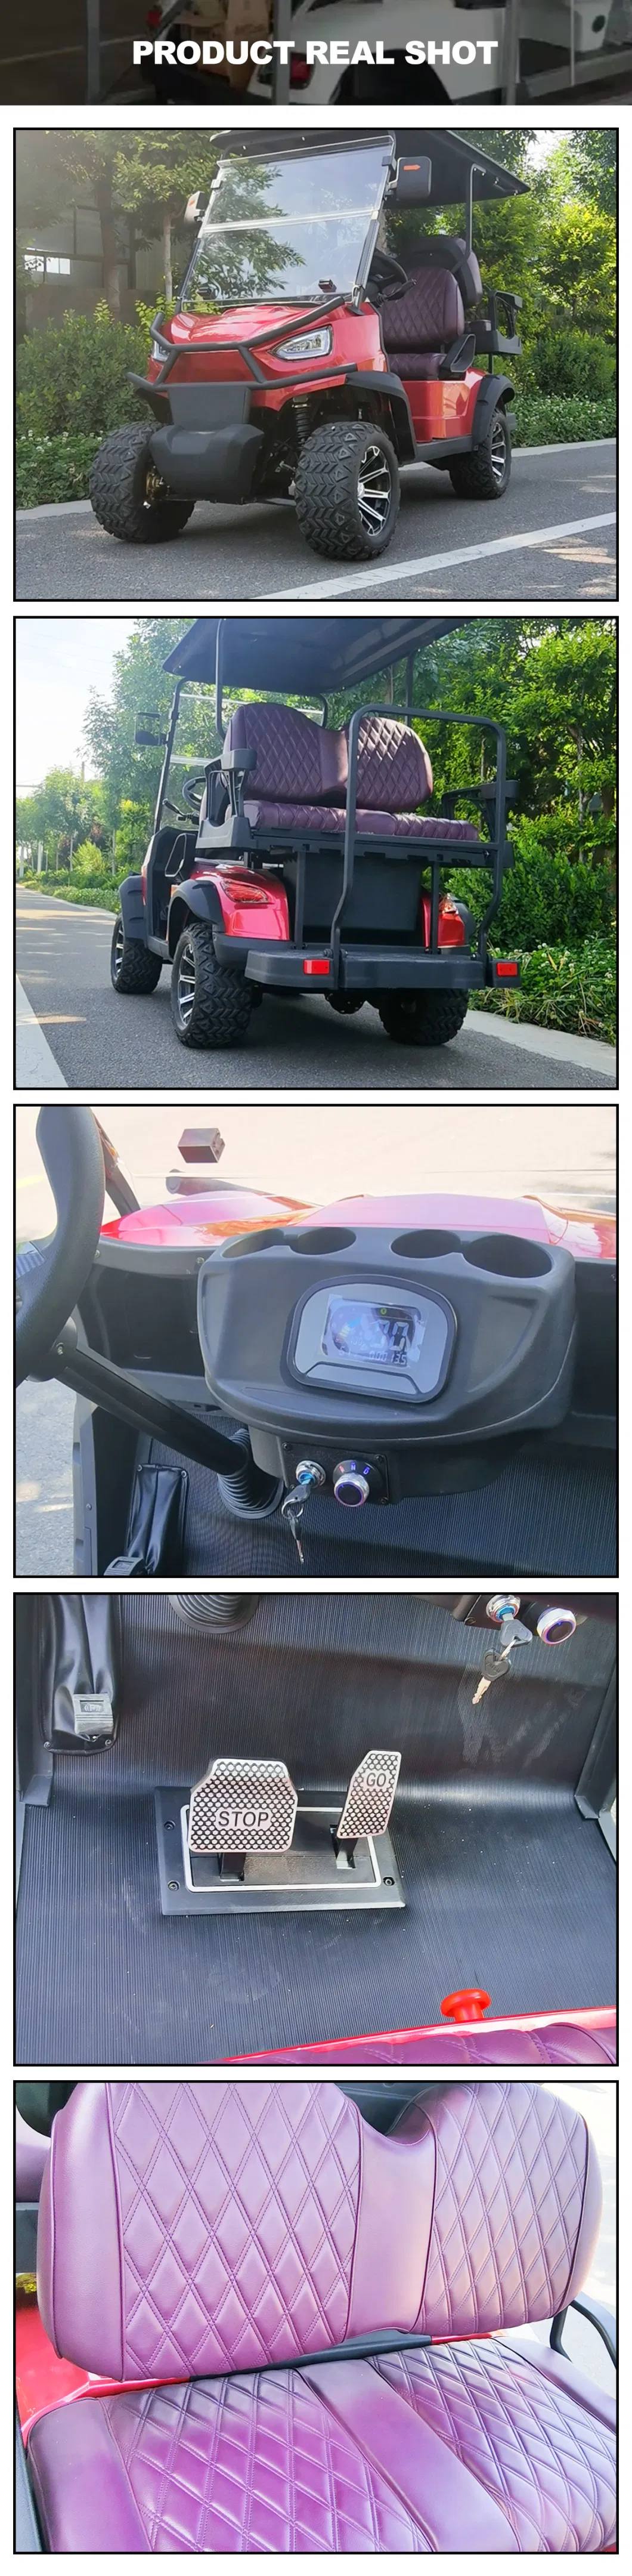 Chinese Golf Carts Supplies Four Wheel 4 Seater 2 Row Single off Road Advanced EV Slow Lsv Golf Carts Electric Lithium Electric off Road Tour Golf Cart